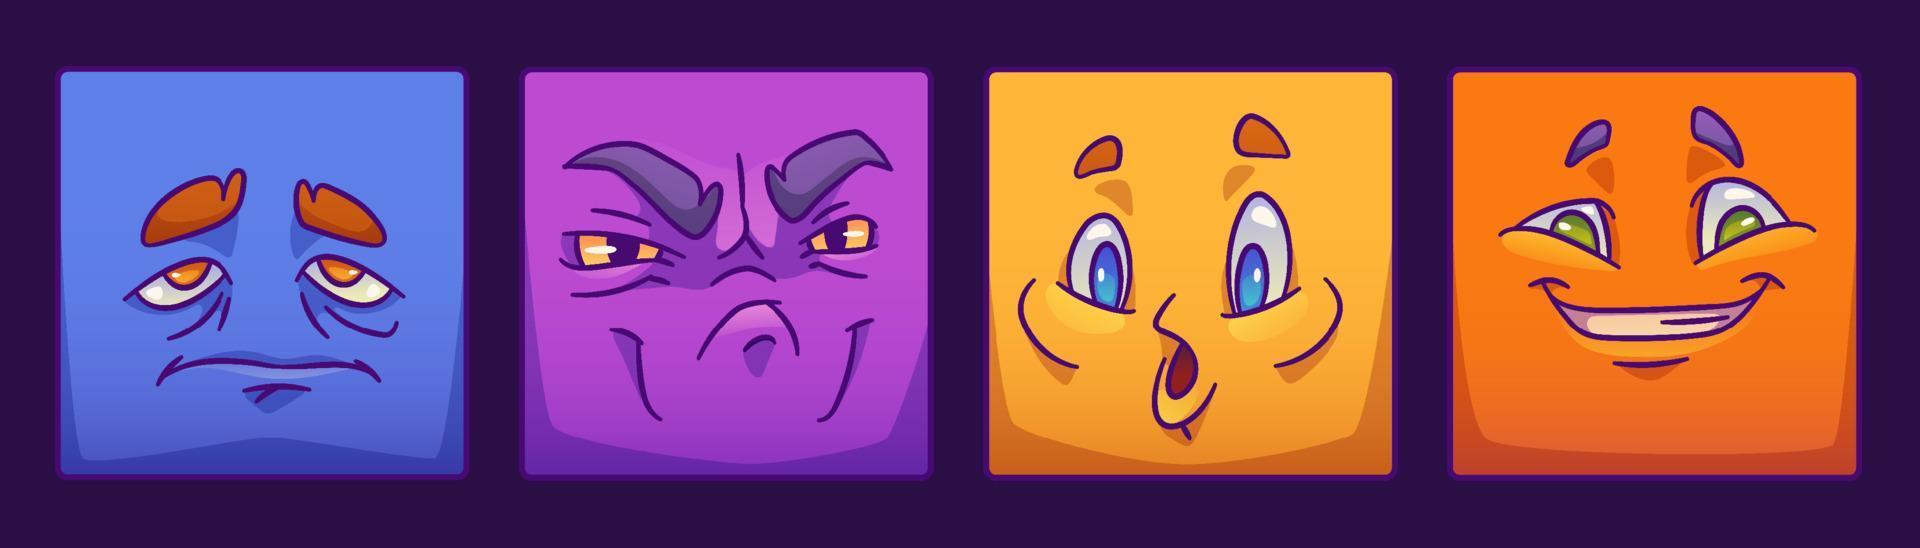 Square monster face emotion. Abstract game avatar vector